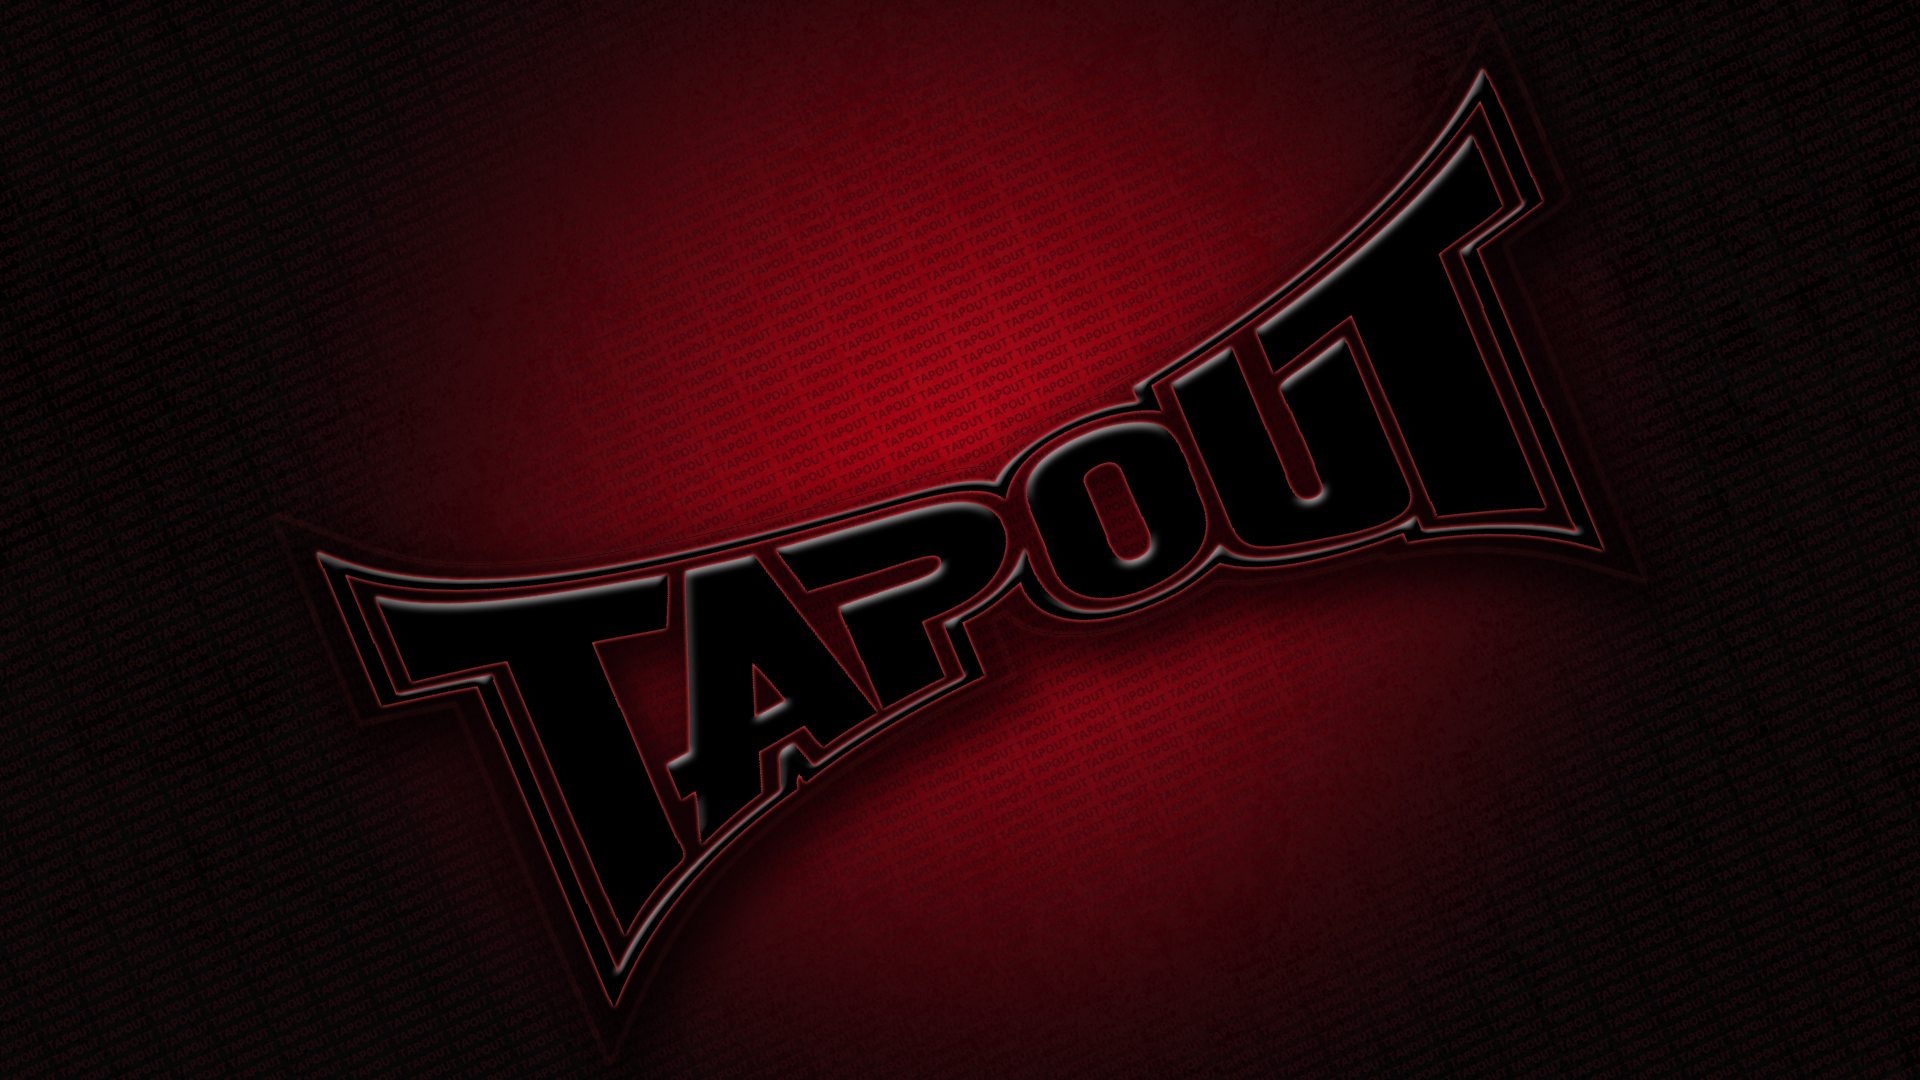 Black Big Tapout Logo Red Glow Angled Tapout Small Print Red Grunge Background